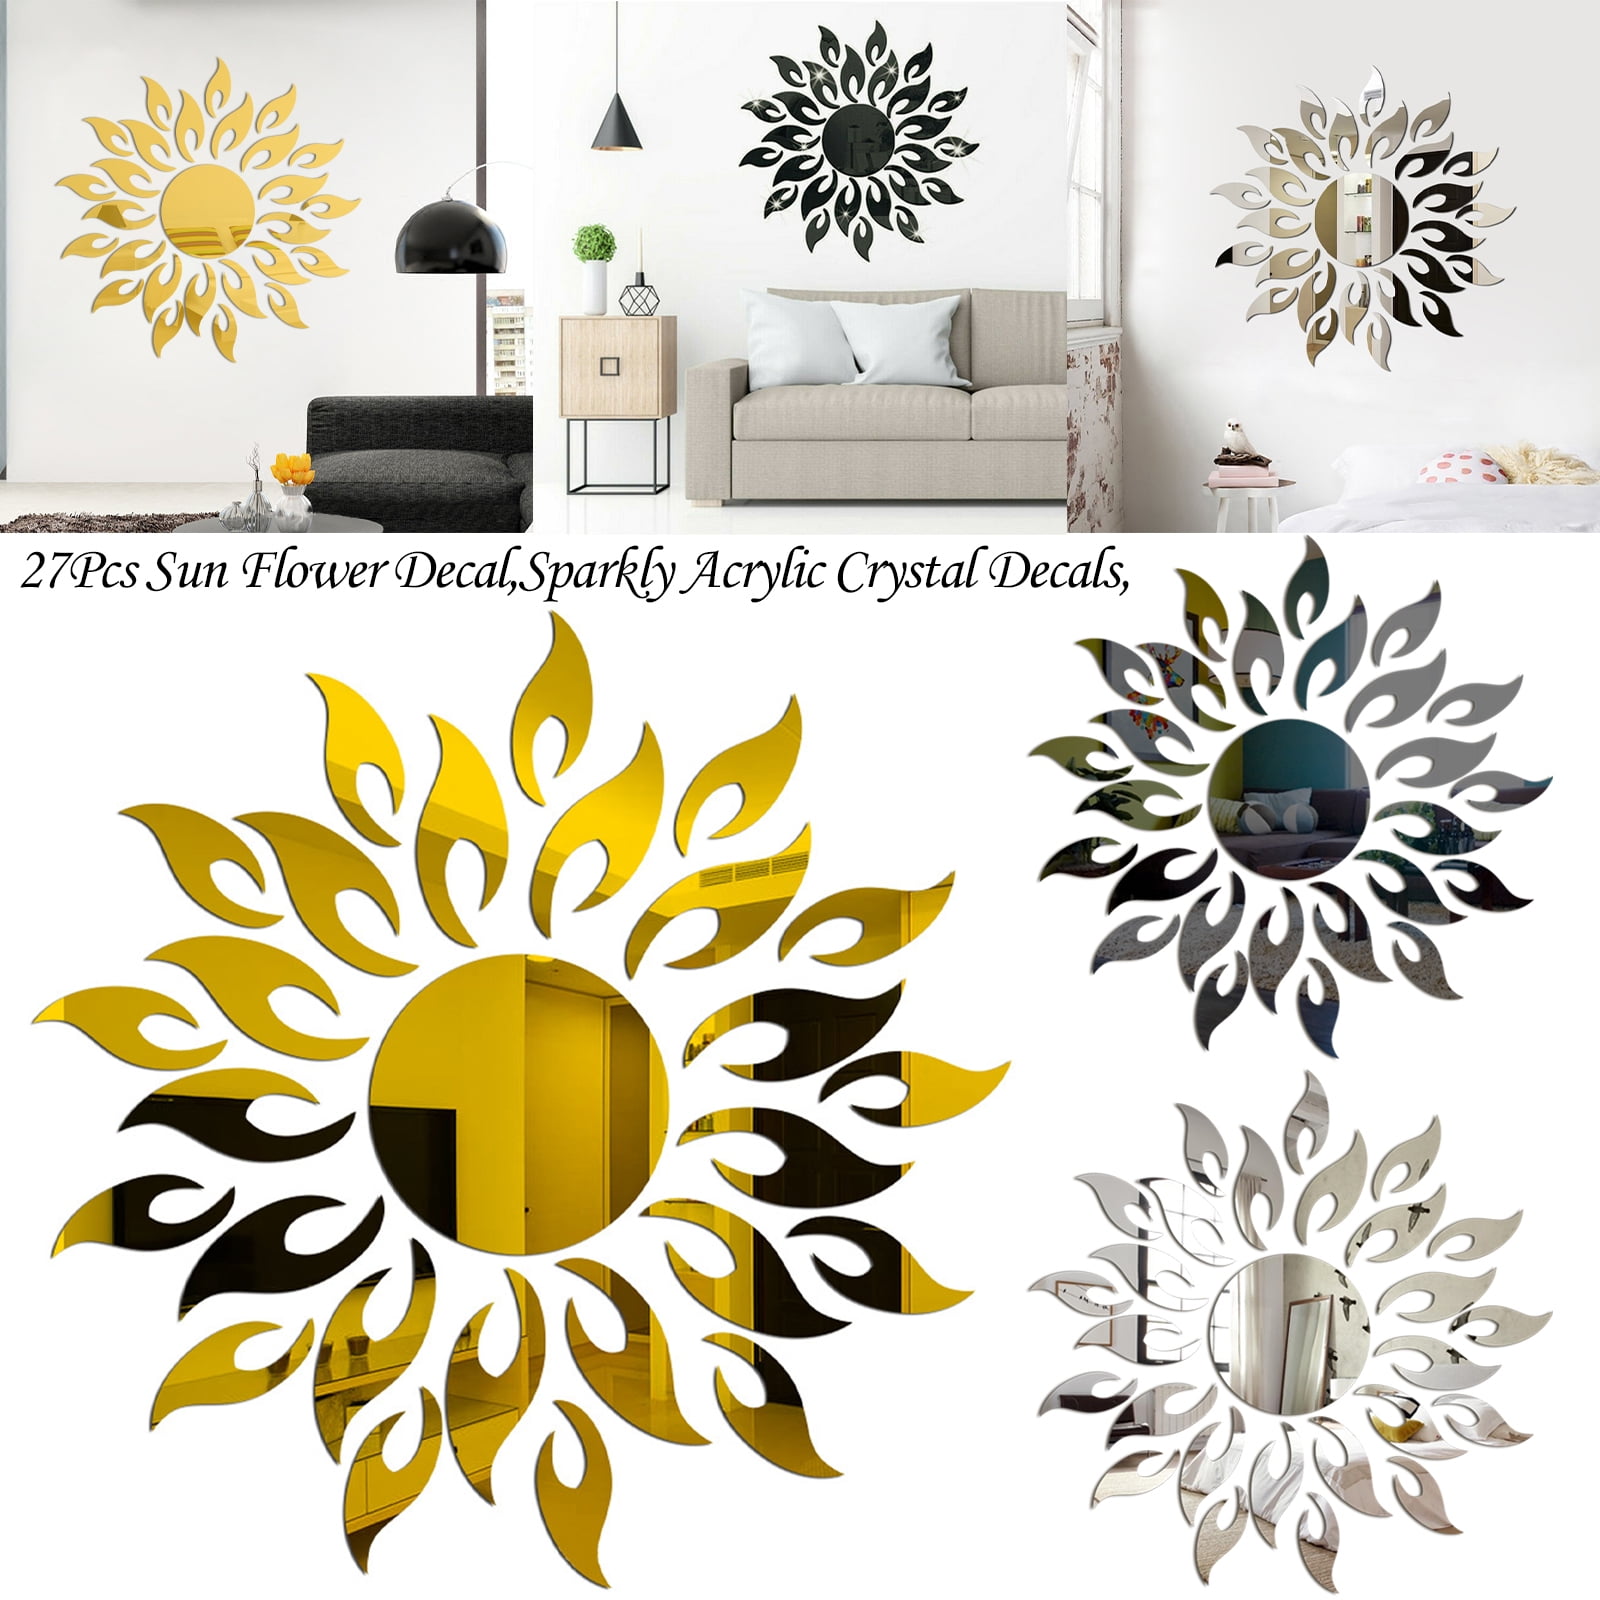 Details about  / 3D Mirror Sun Flower Art Wall Sticker Self-adhesive Dining Room Bedroom Decor